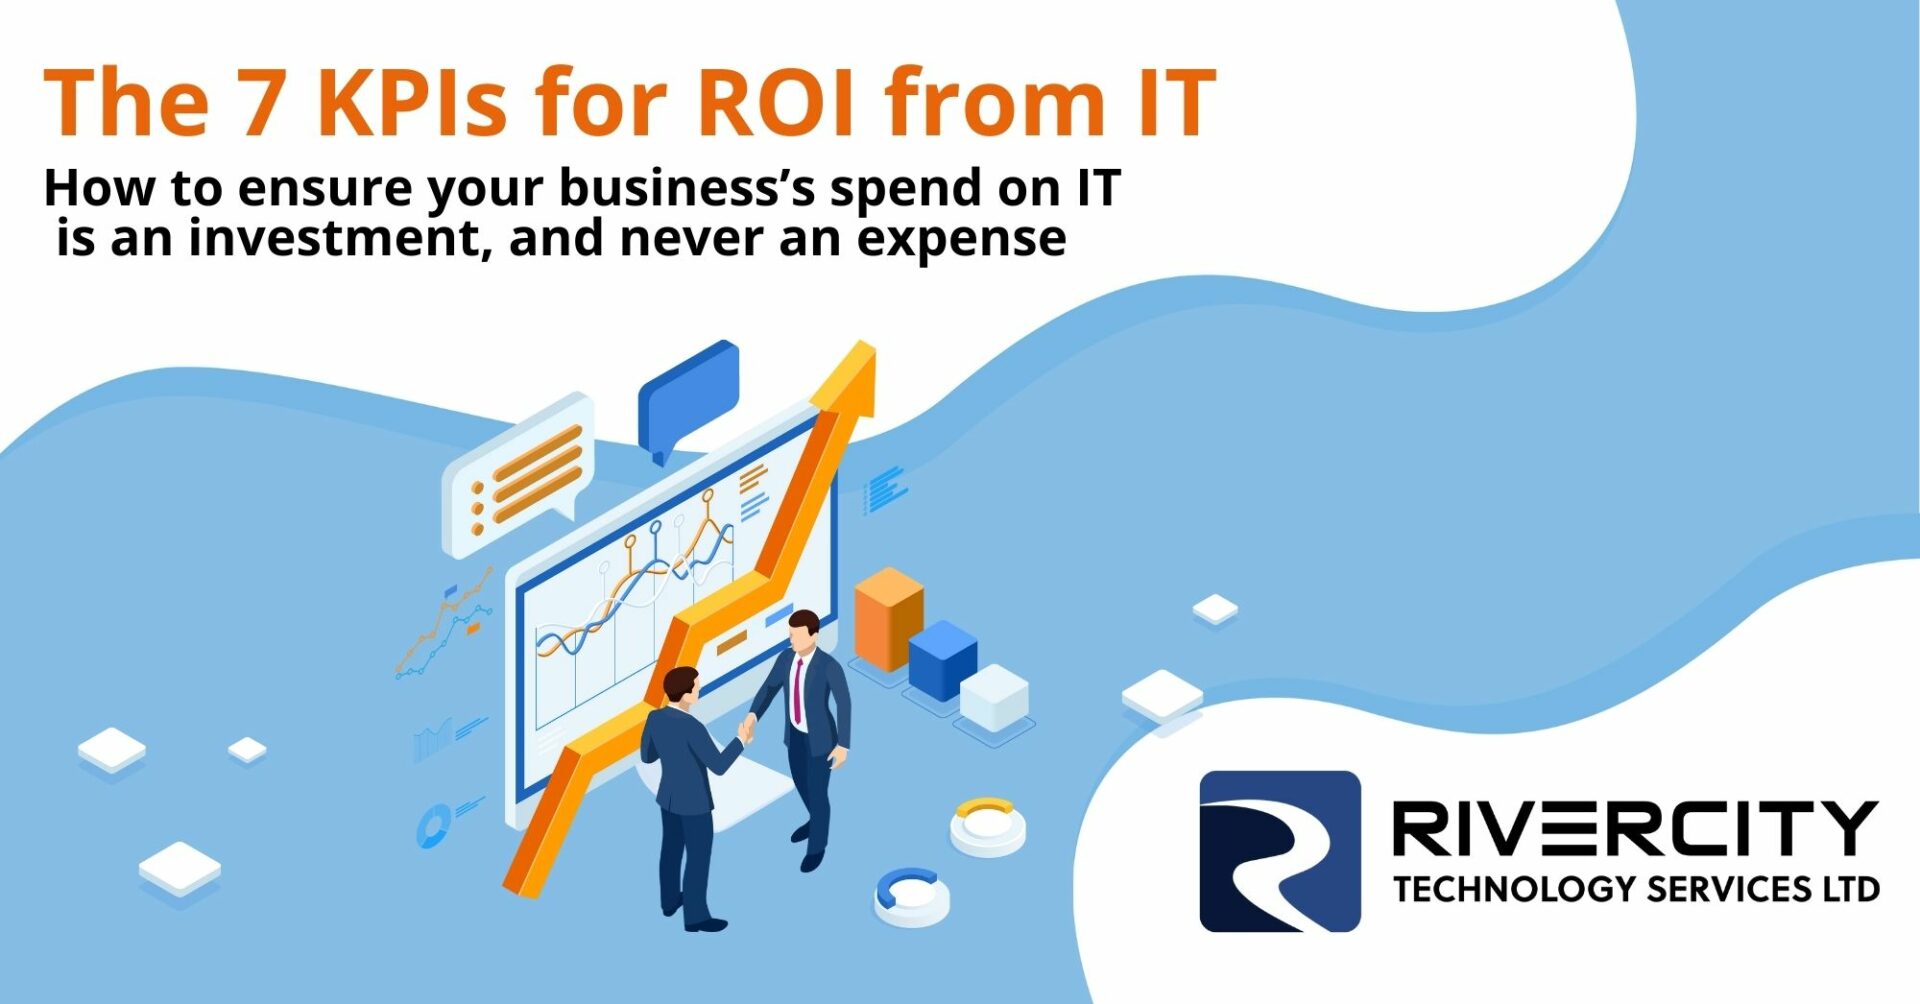 Graphic with the text "Mockup of a book titled "The 7 KPIs for ROI form IT: How to Ensure your business's spend on IT is an investment, and never an expense"